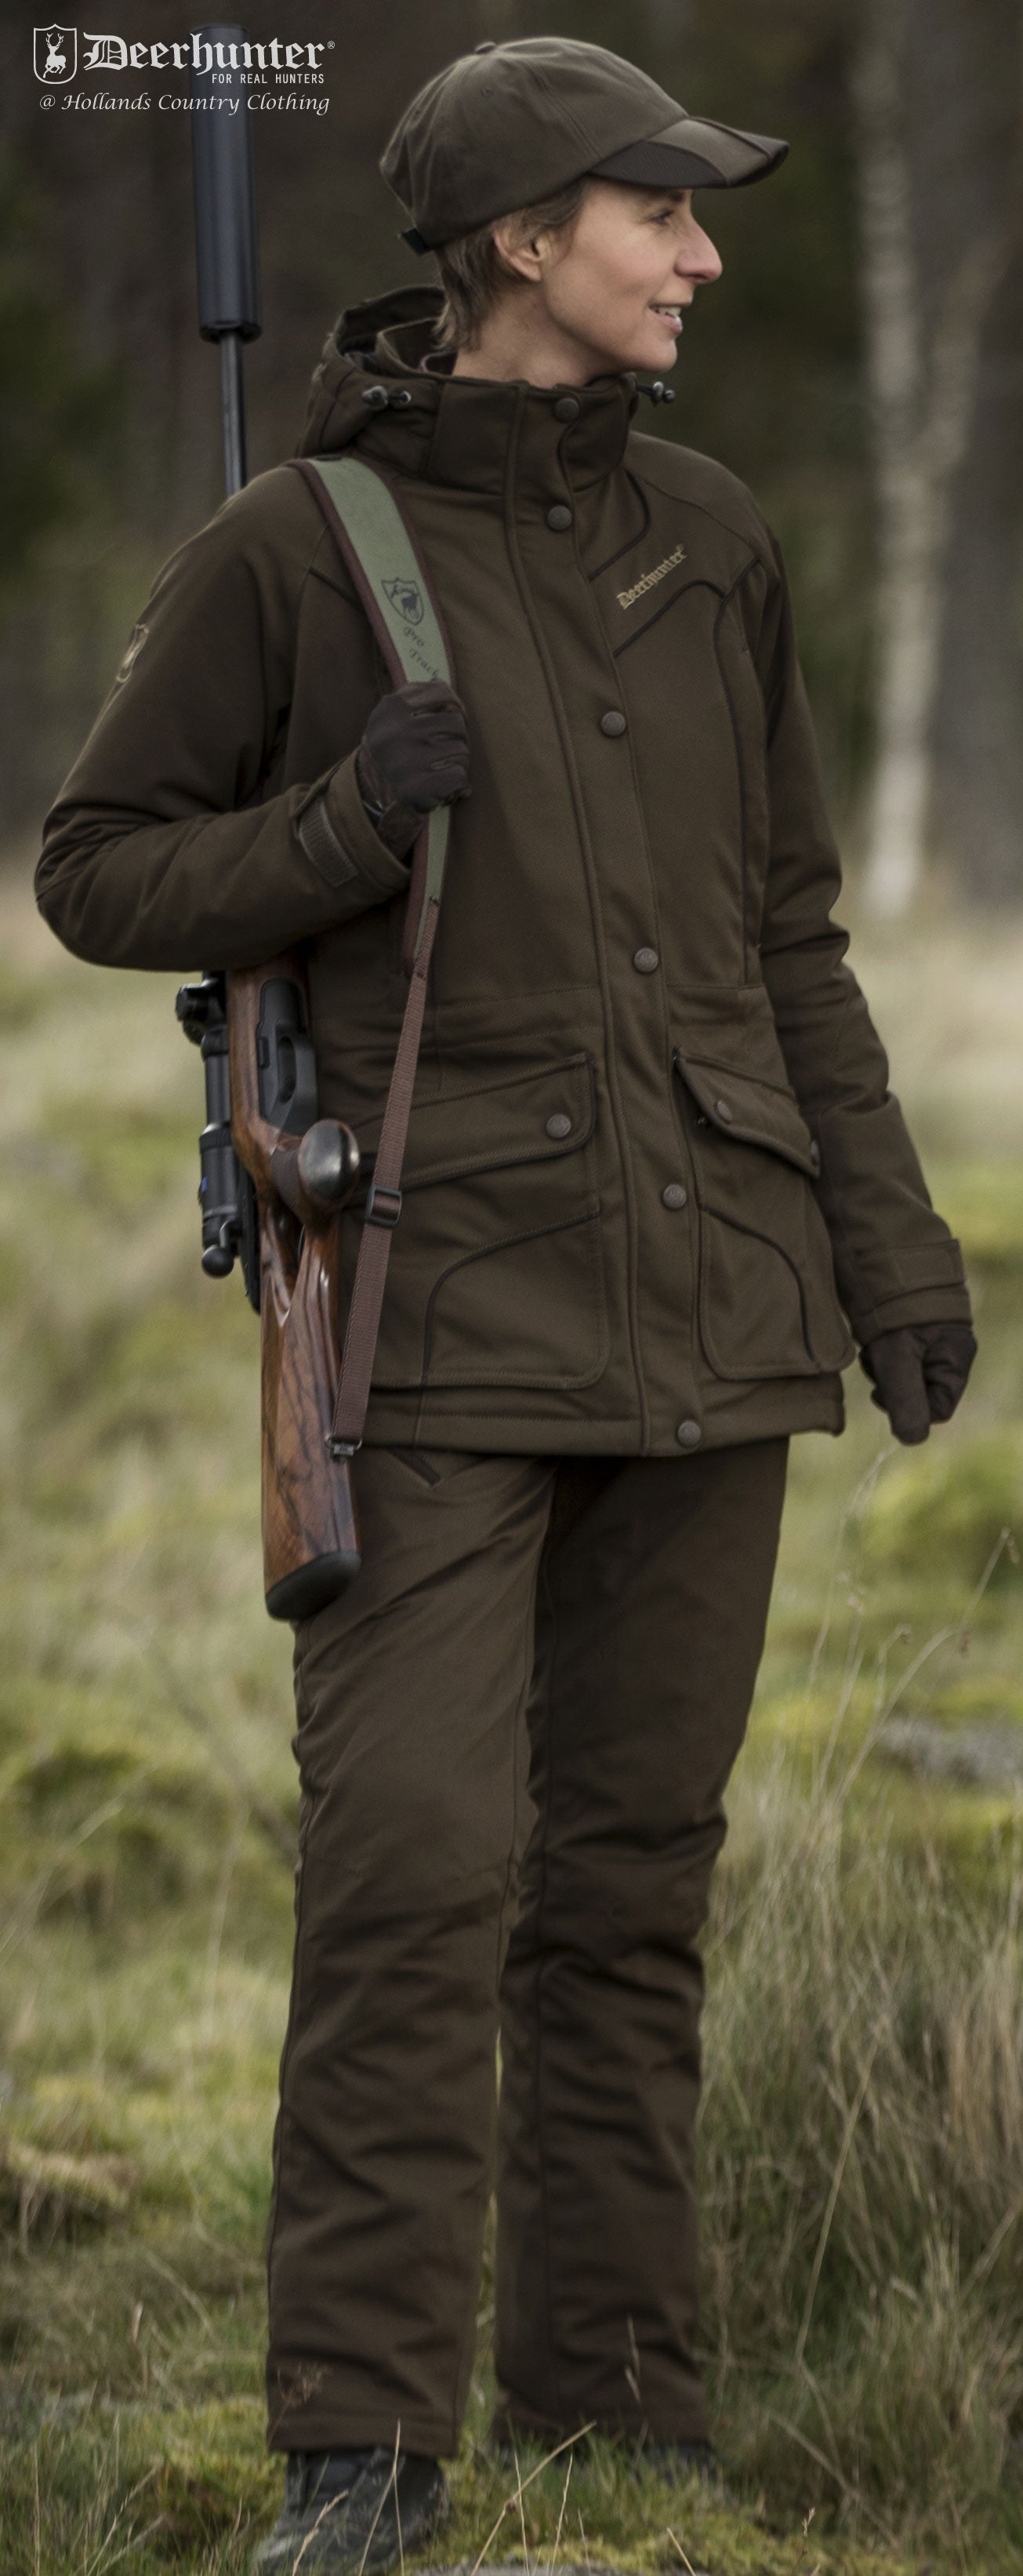 suit with jacket Lady Mary Waterproof Trousers by Deerhunter